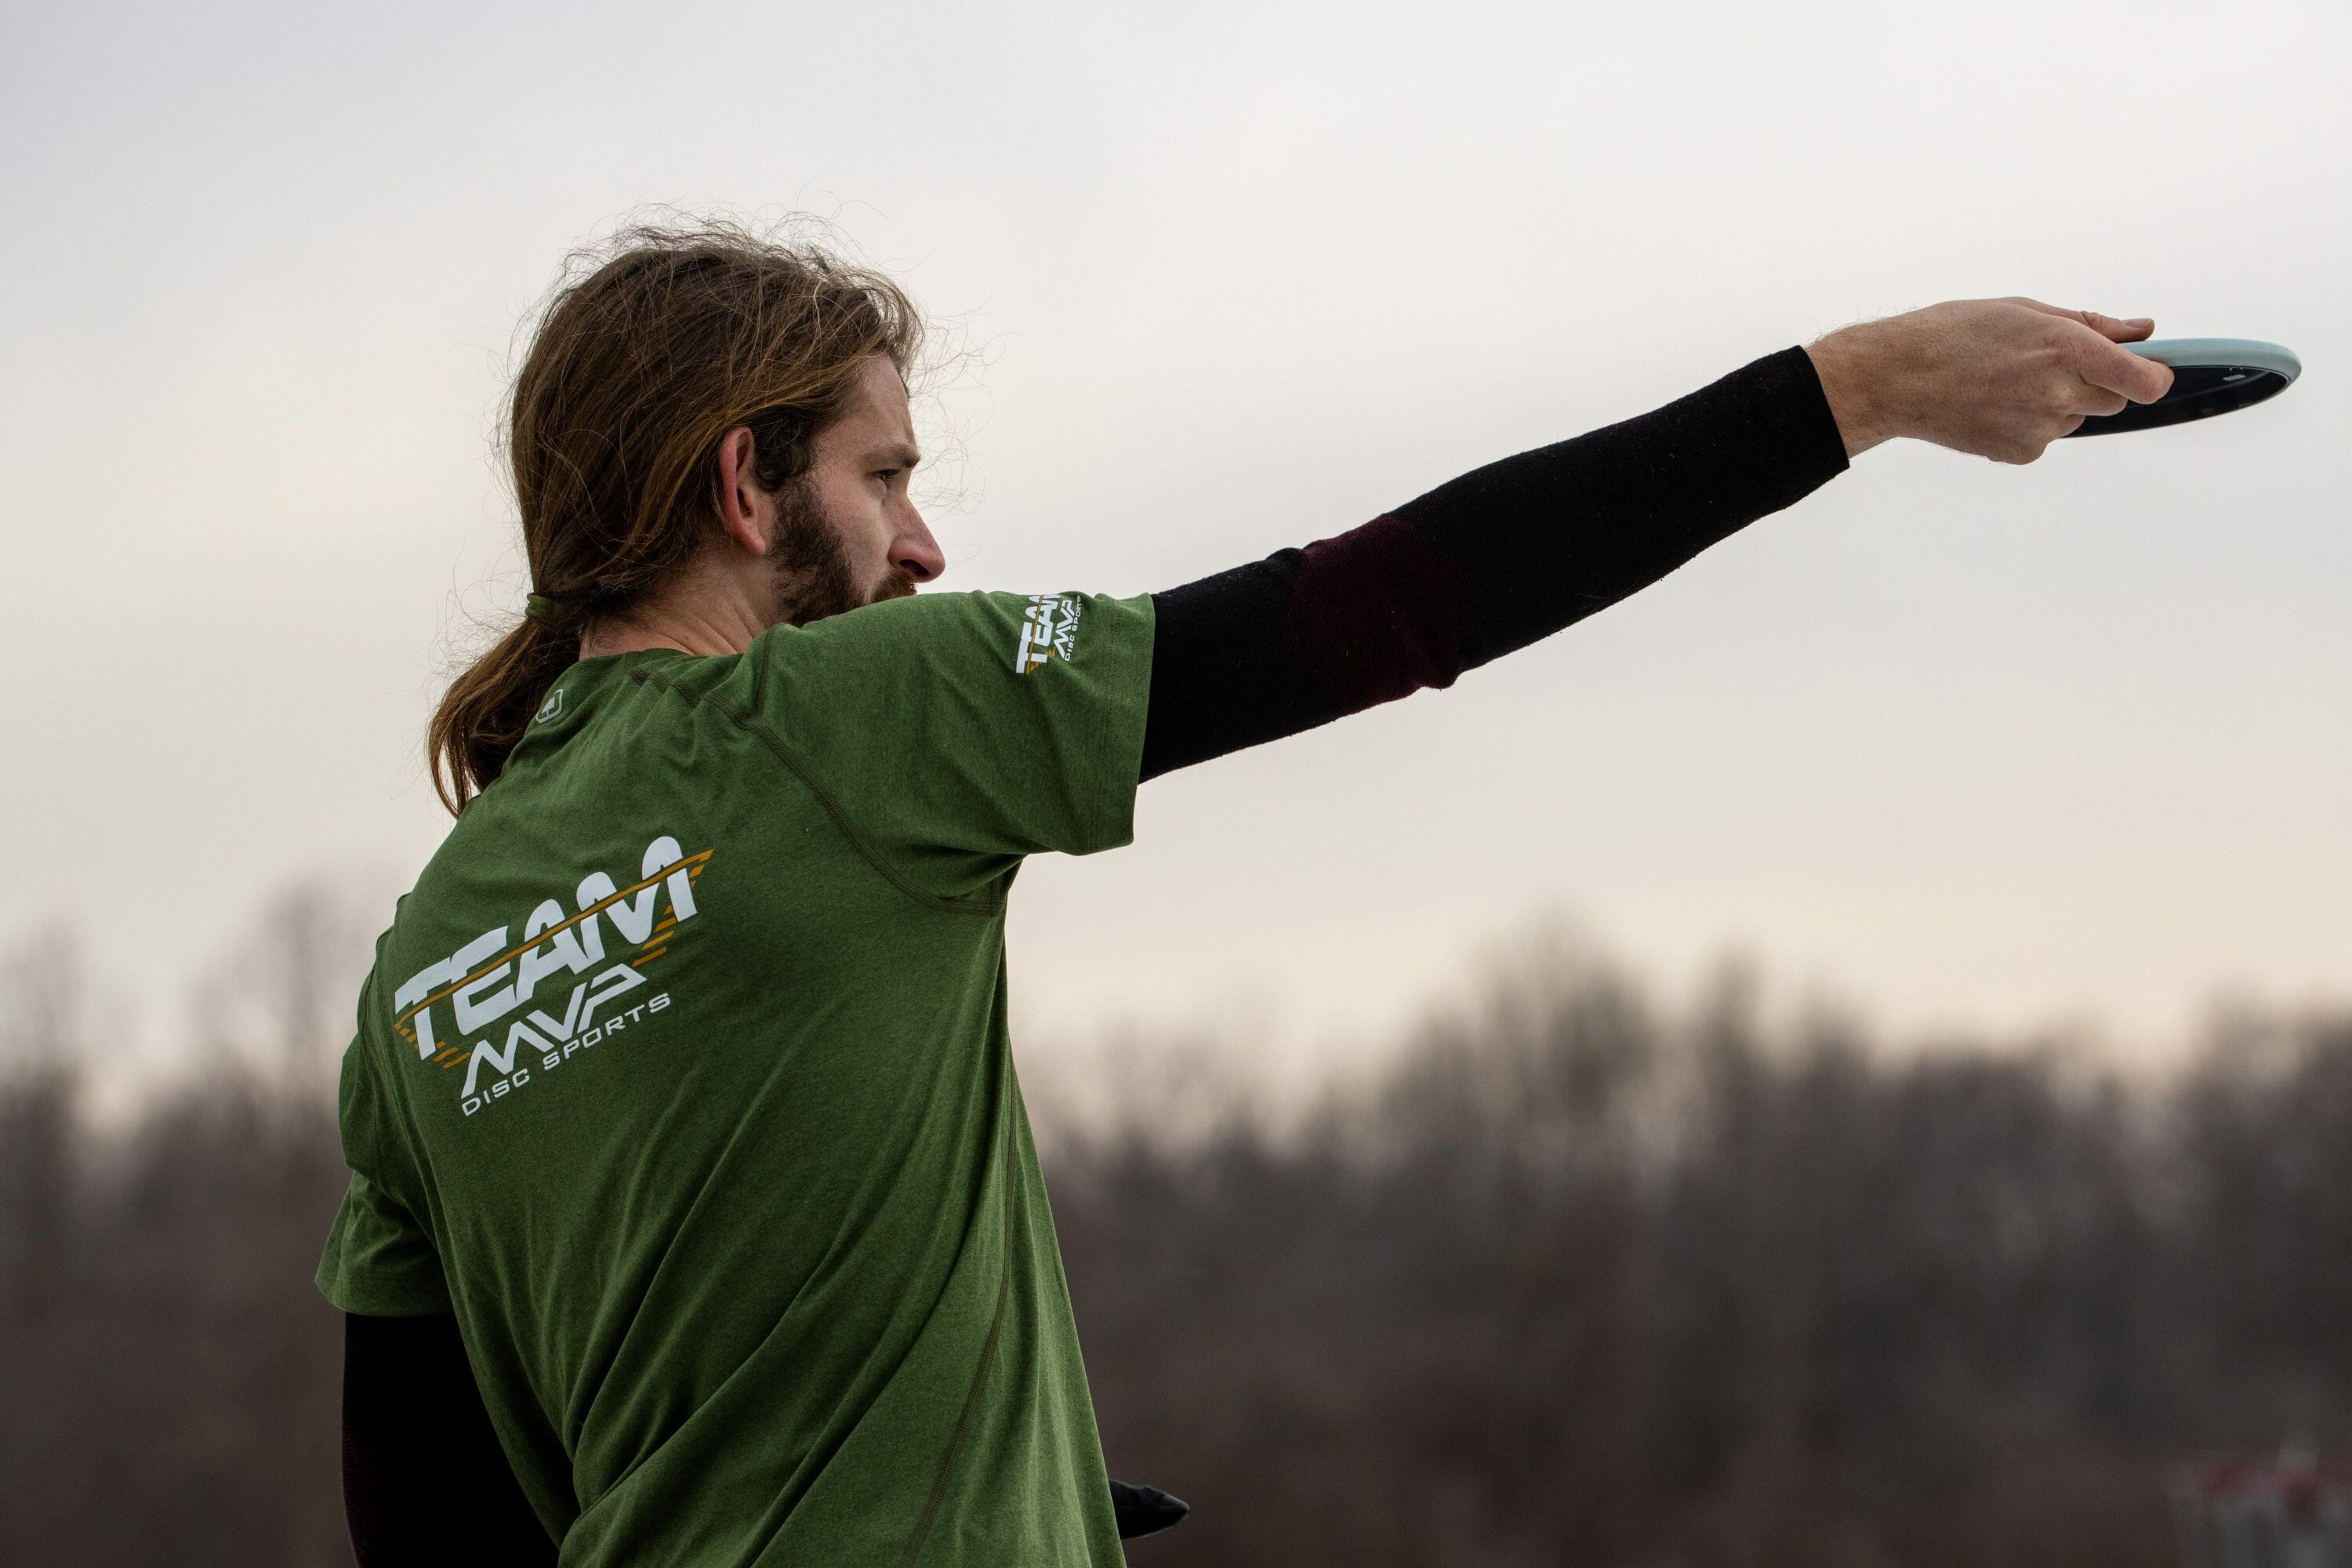 MVP and James Conrad announce 4 year extension : r/discgolf